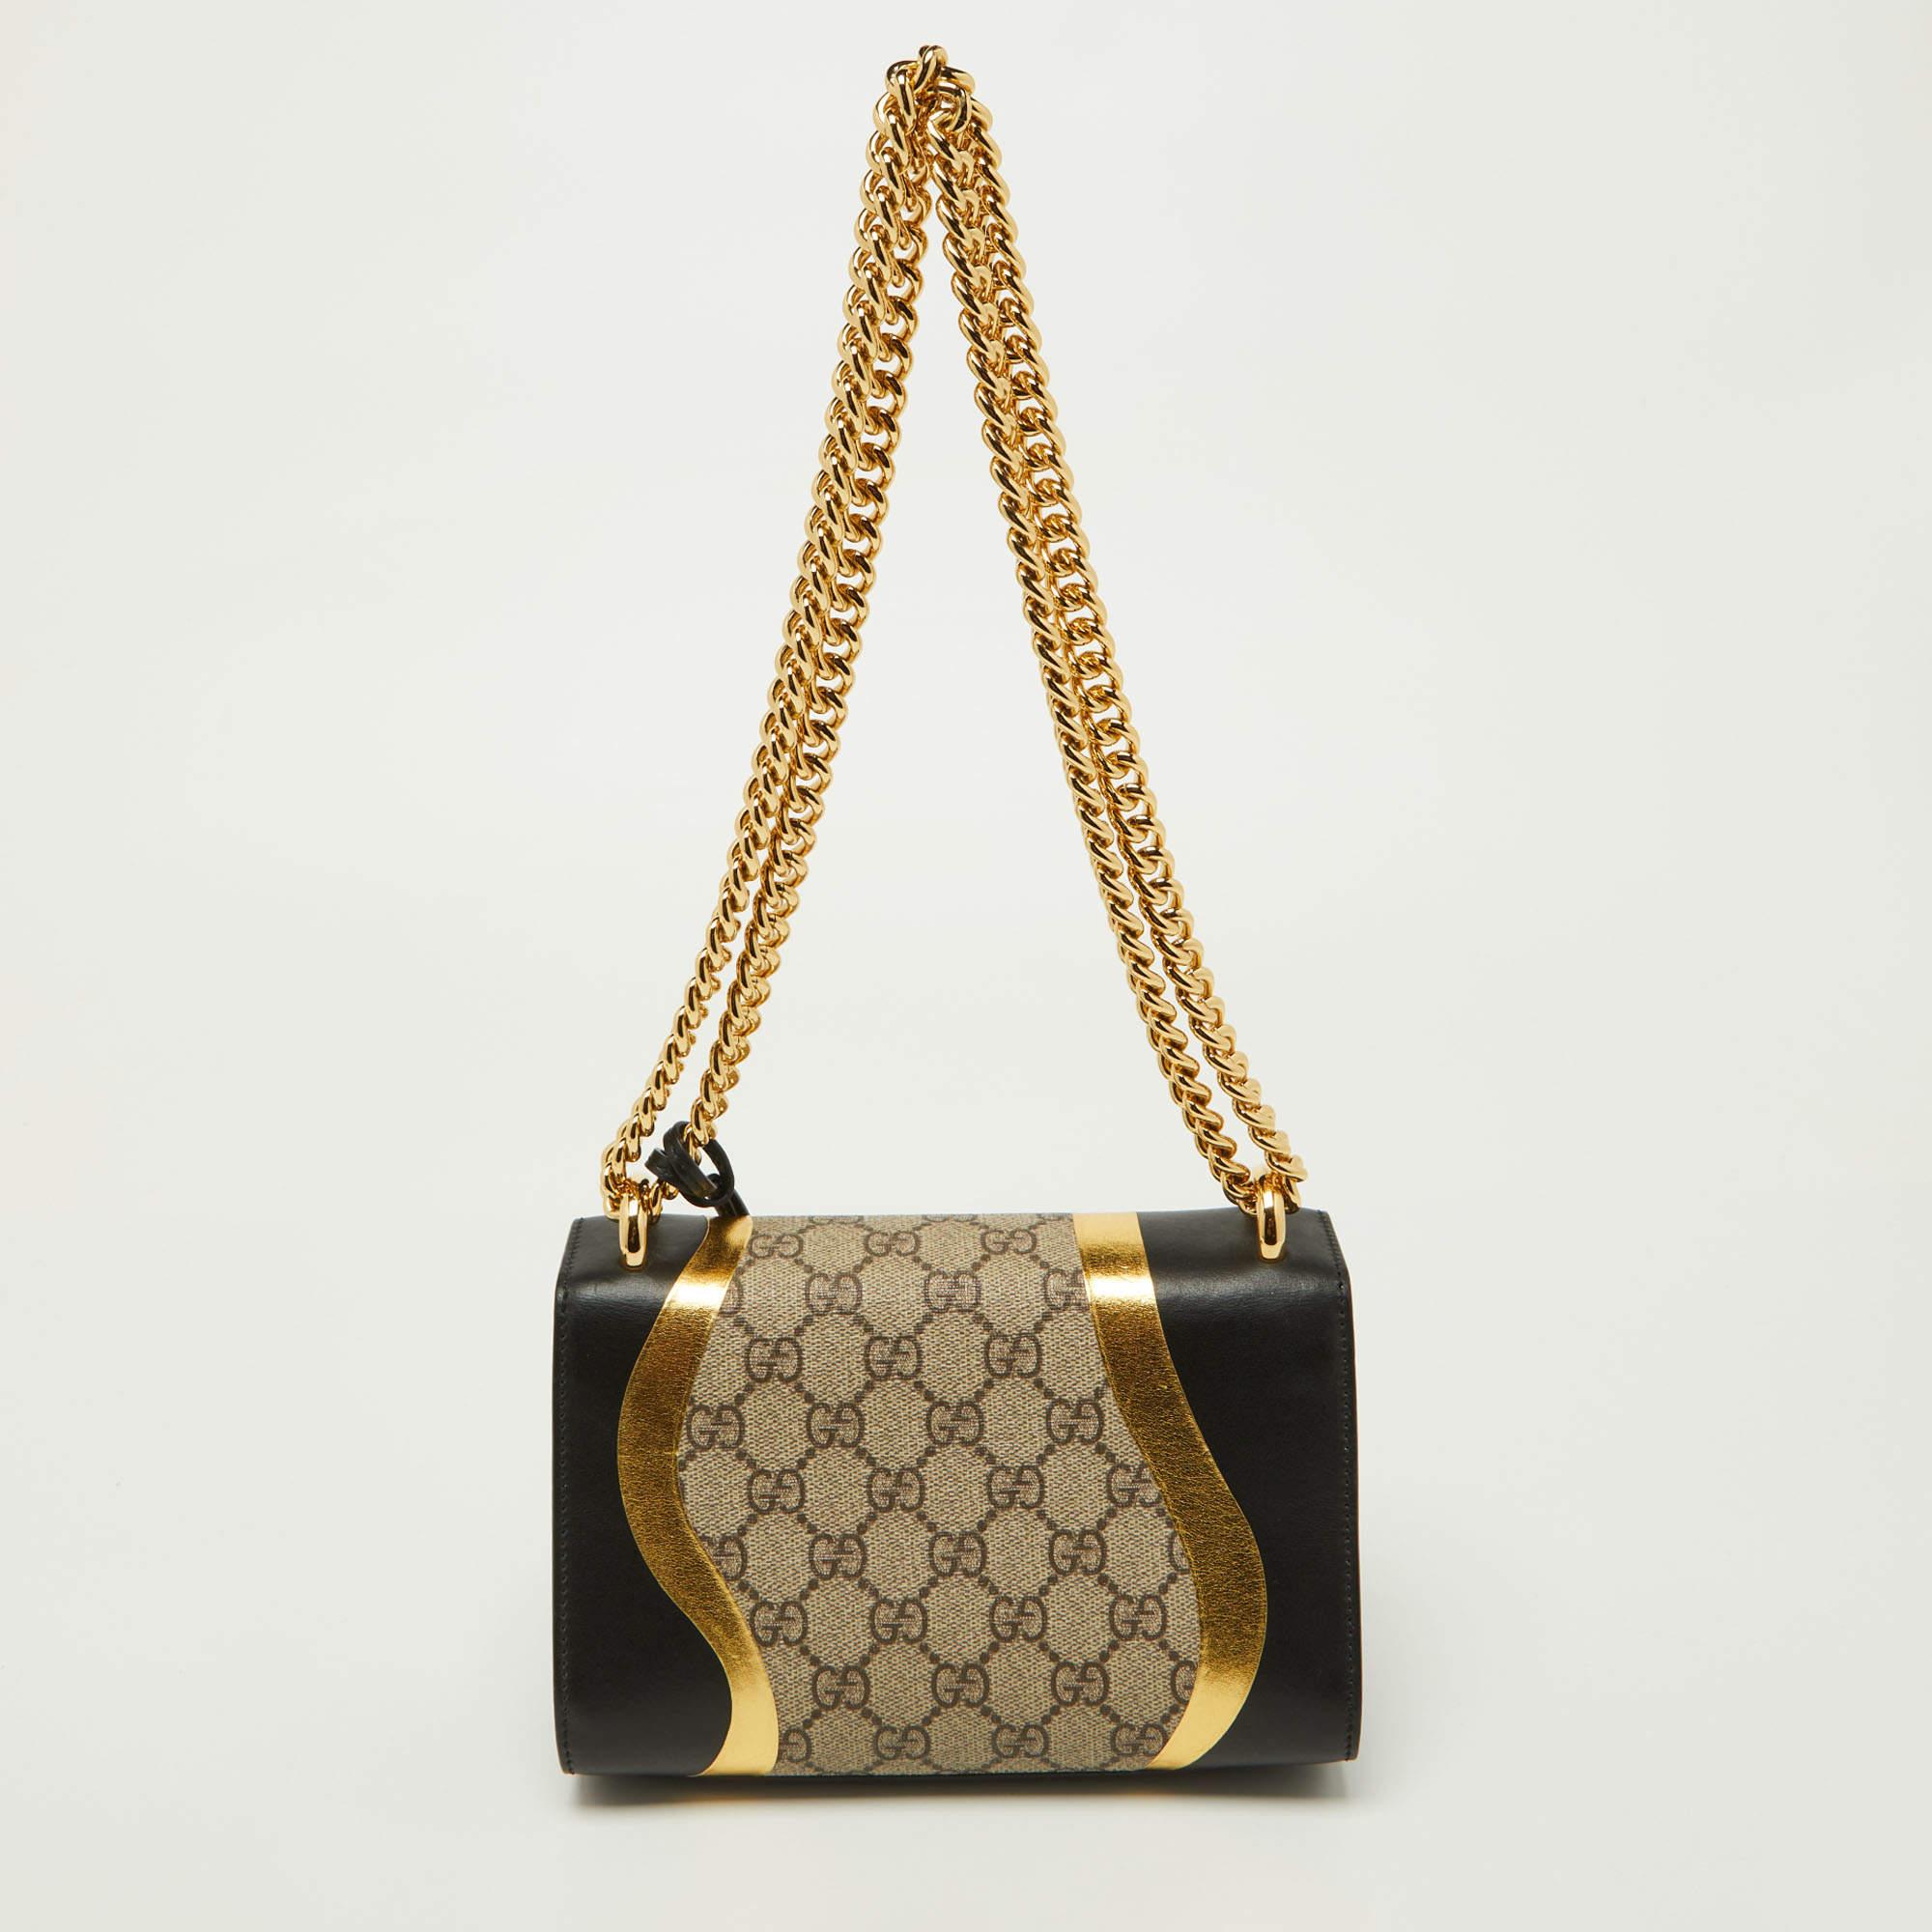 Ensure your day's essentials are in order and your outfit is complete with this Gucci shoulder bag. Crafted using the best materials, the bag carries the maison's signature of artful craftsmanship and enduring appeal.

Includes: Original Dustbag,